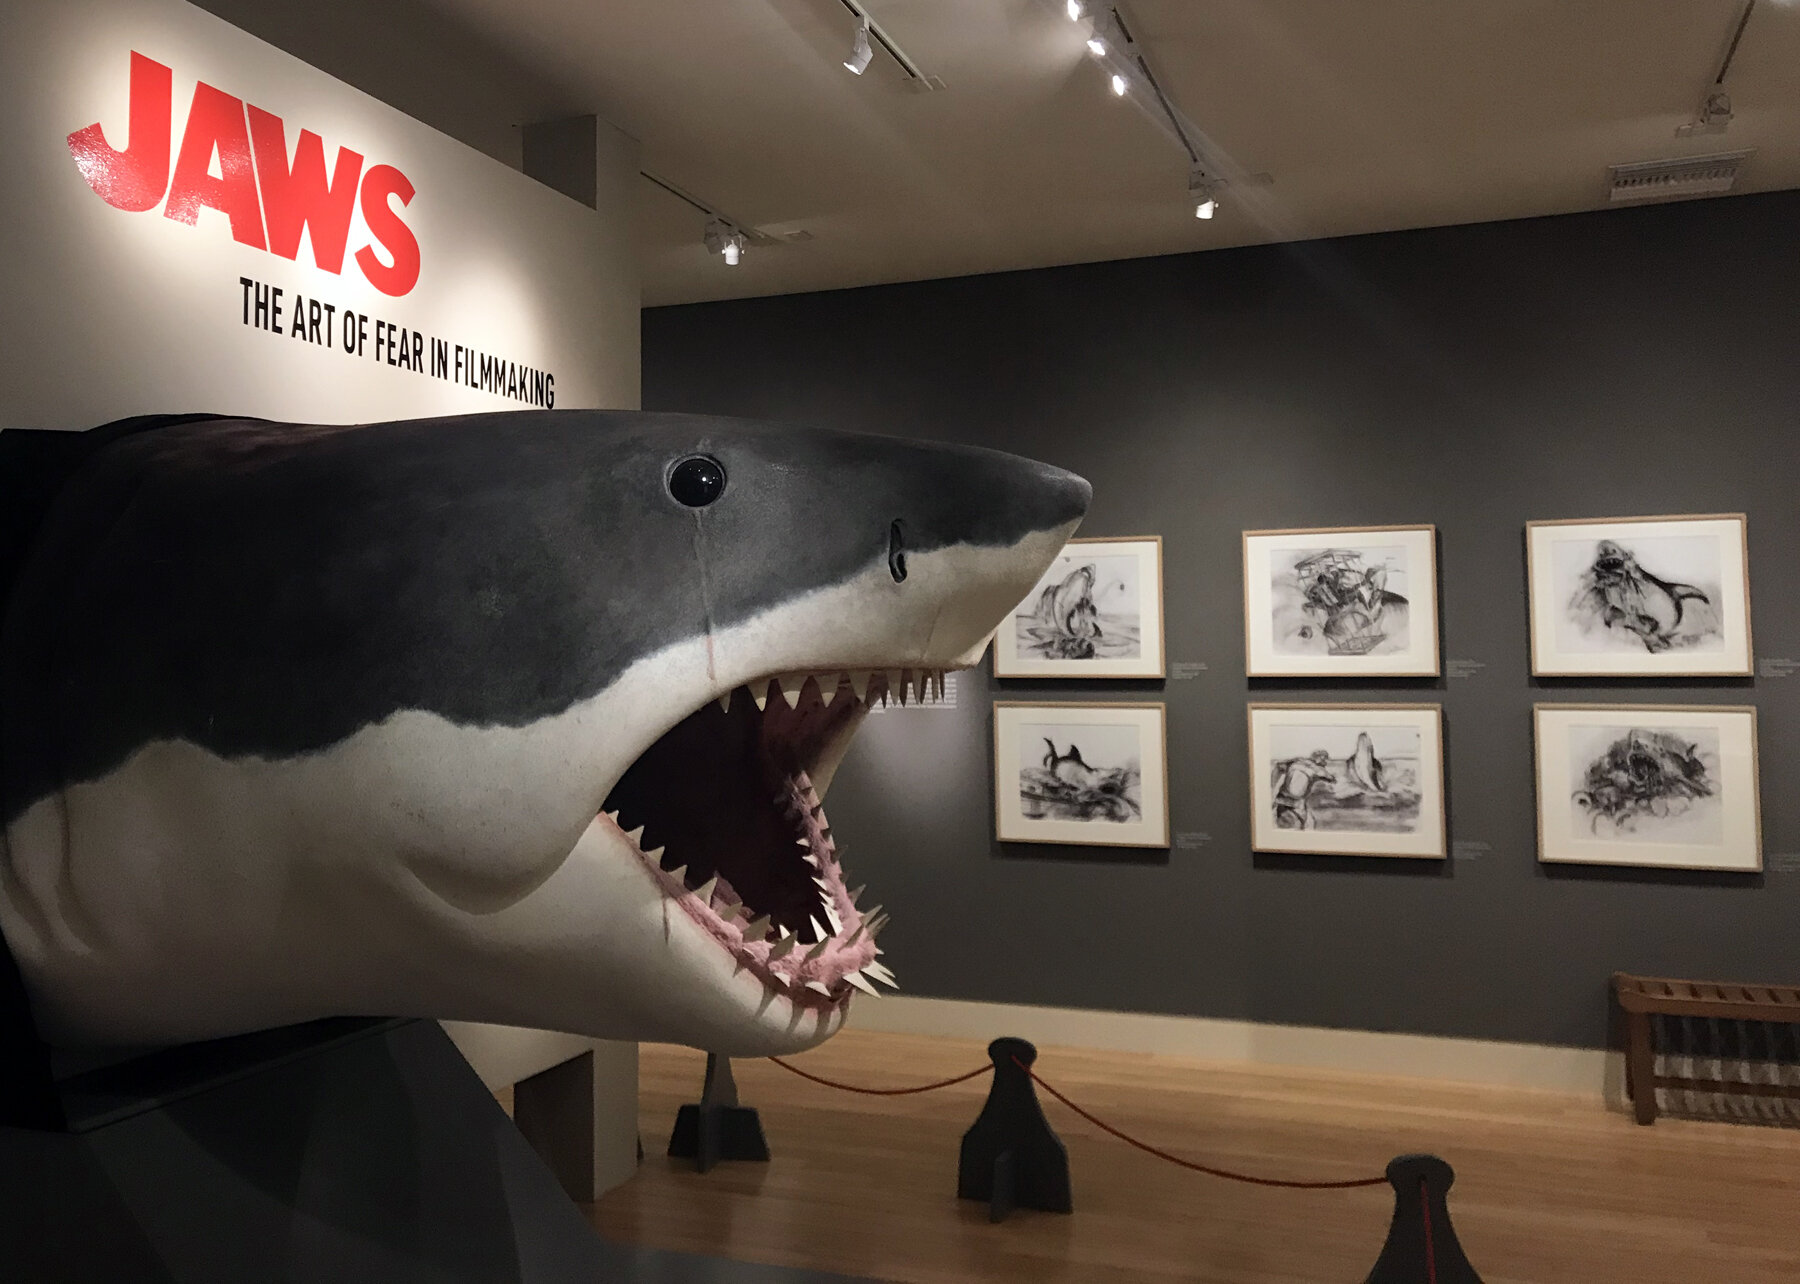 Academy Museum Isn't The First Time Jaws Has Made An Exhibition Of